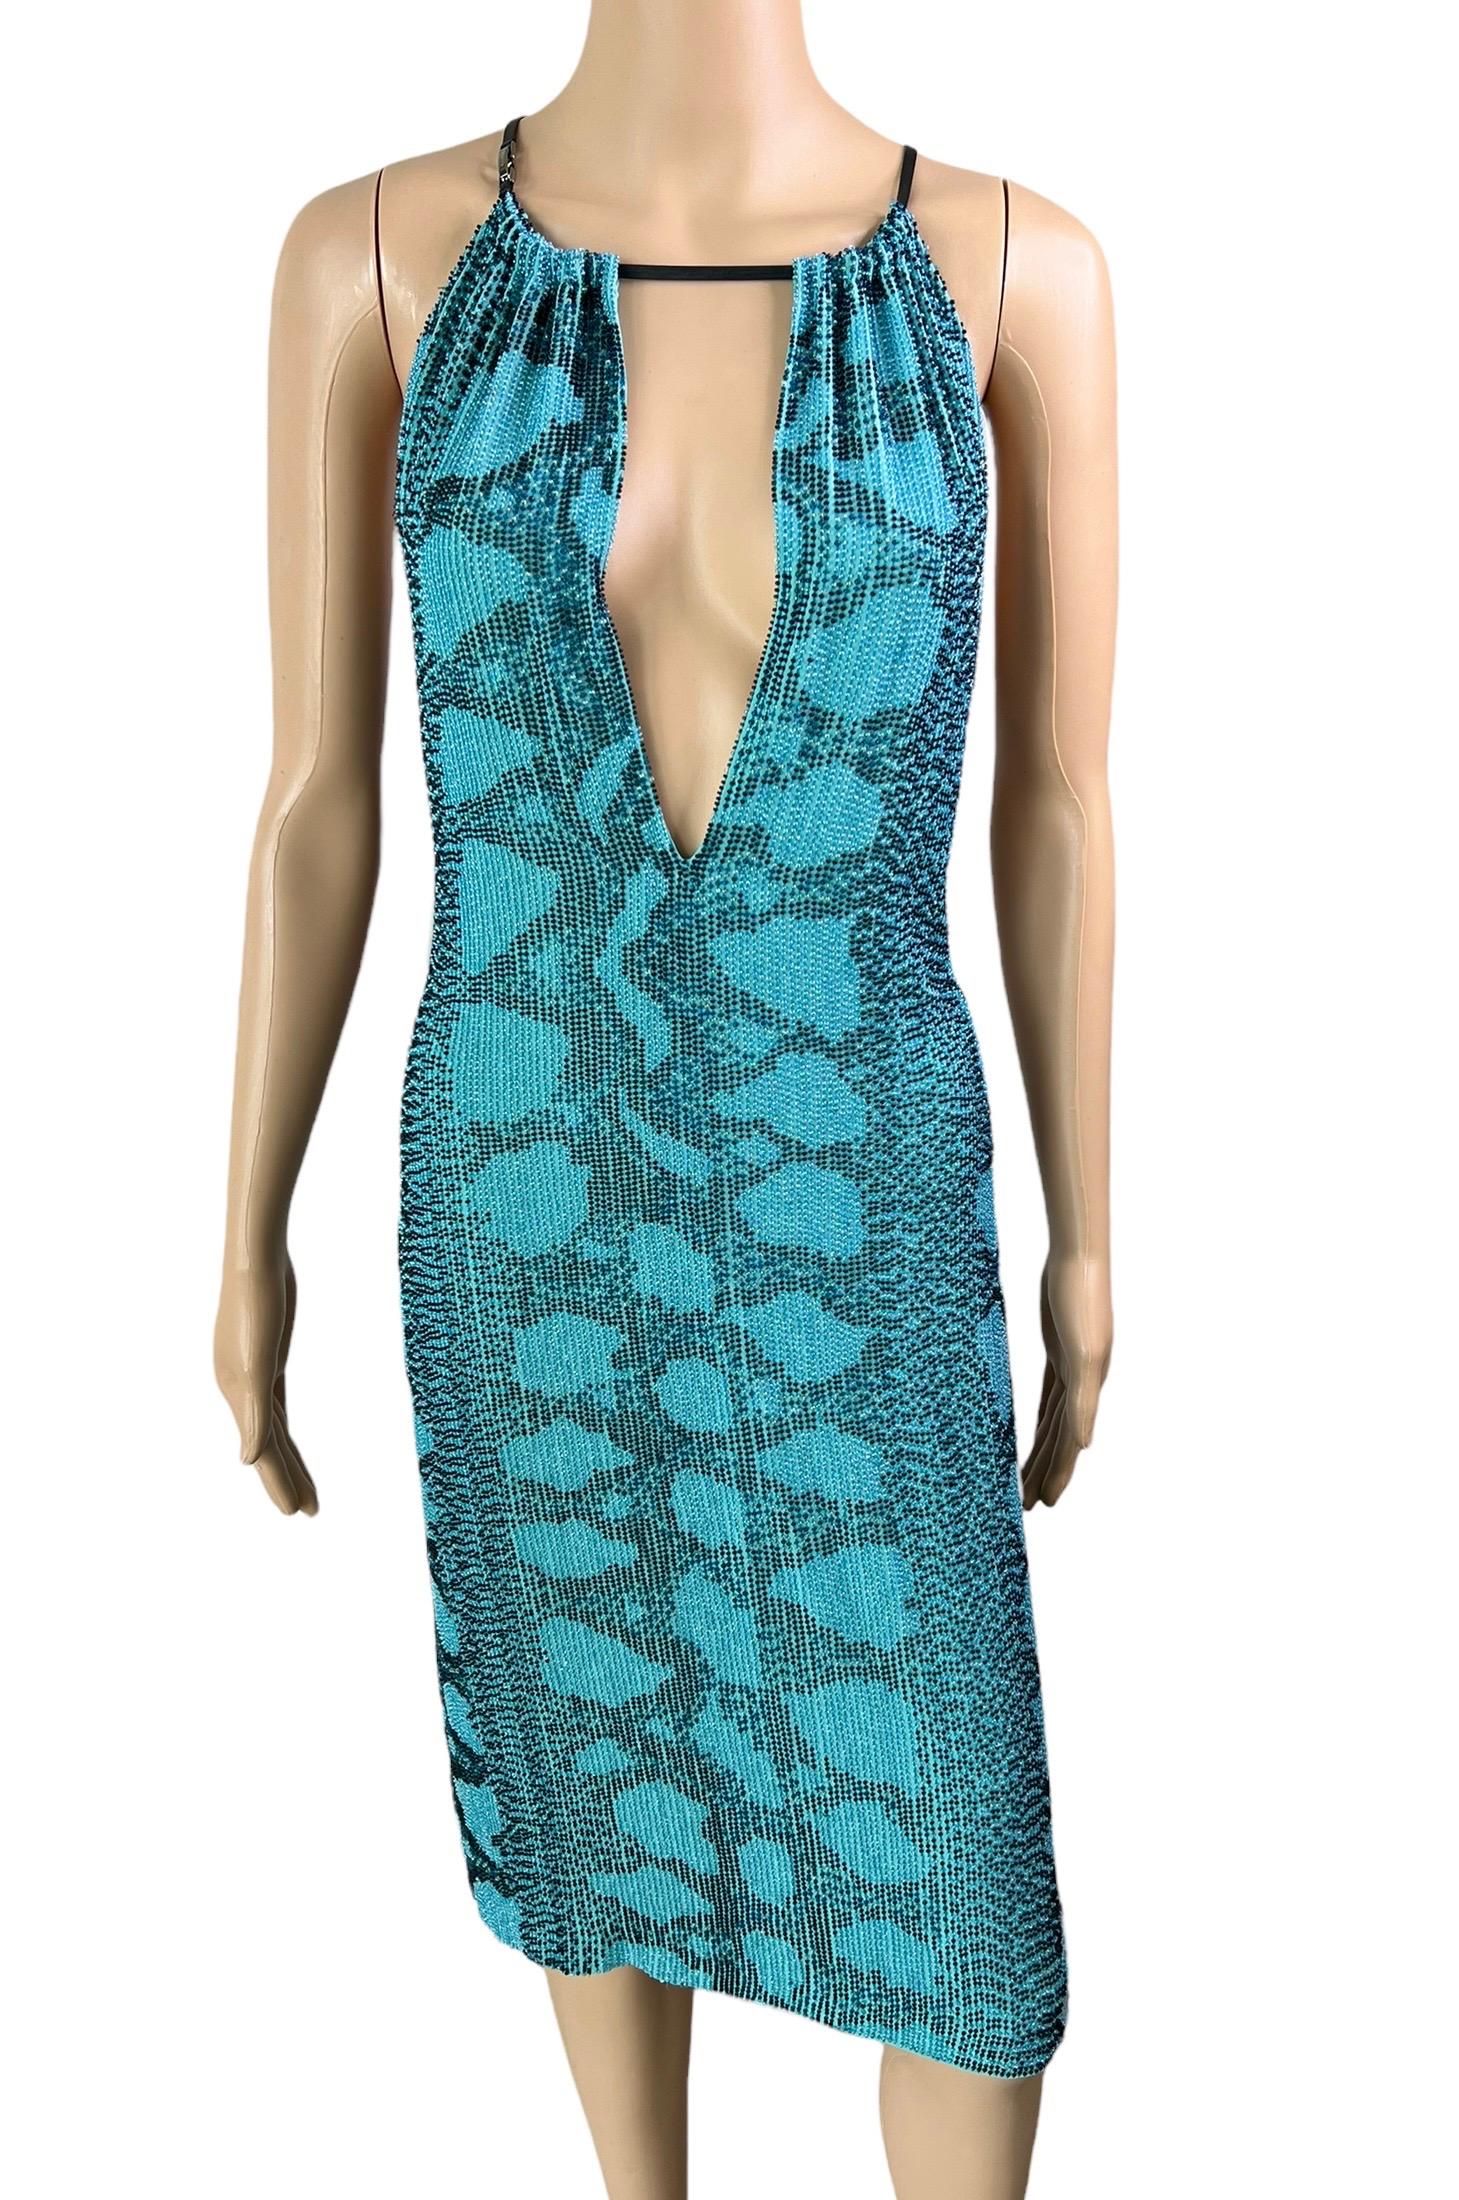 Tom Ford for Gucci S/S 2000 Runway Embellished Plunging Python Print Midi Dress 1